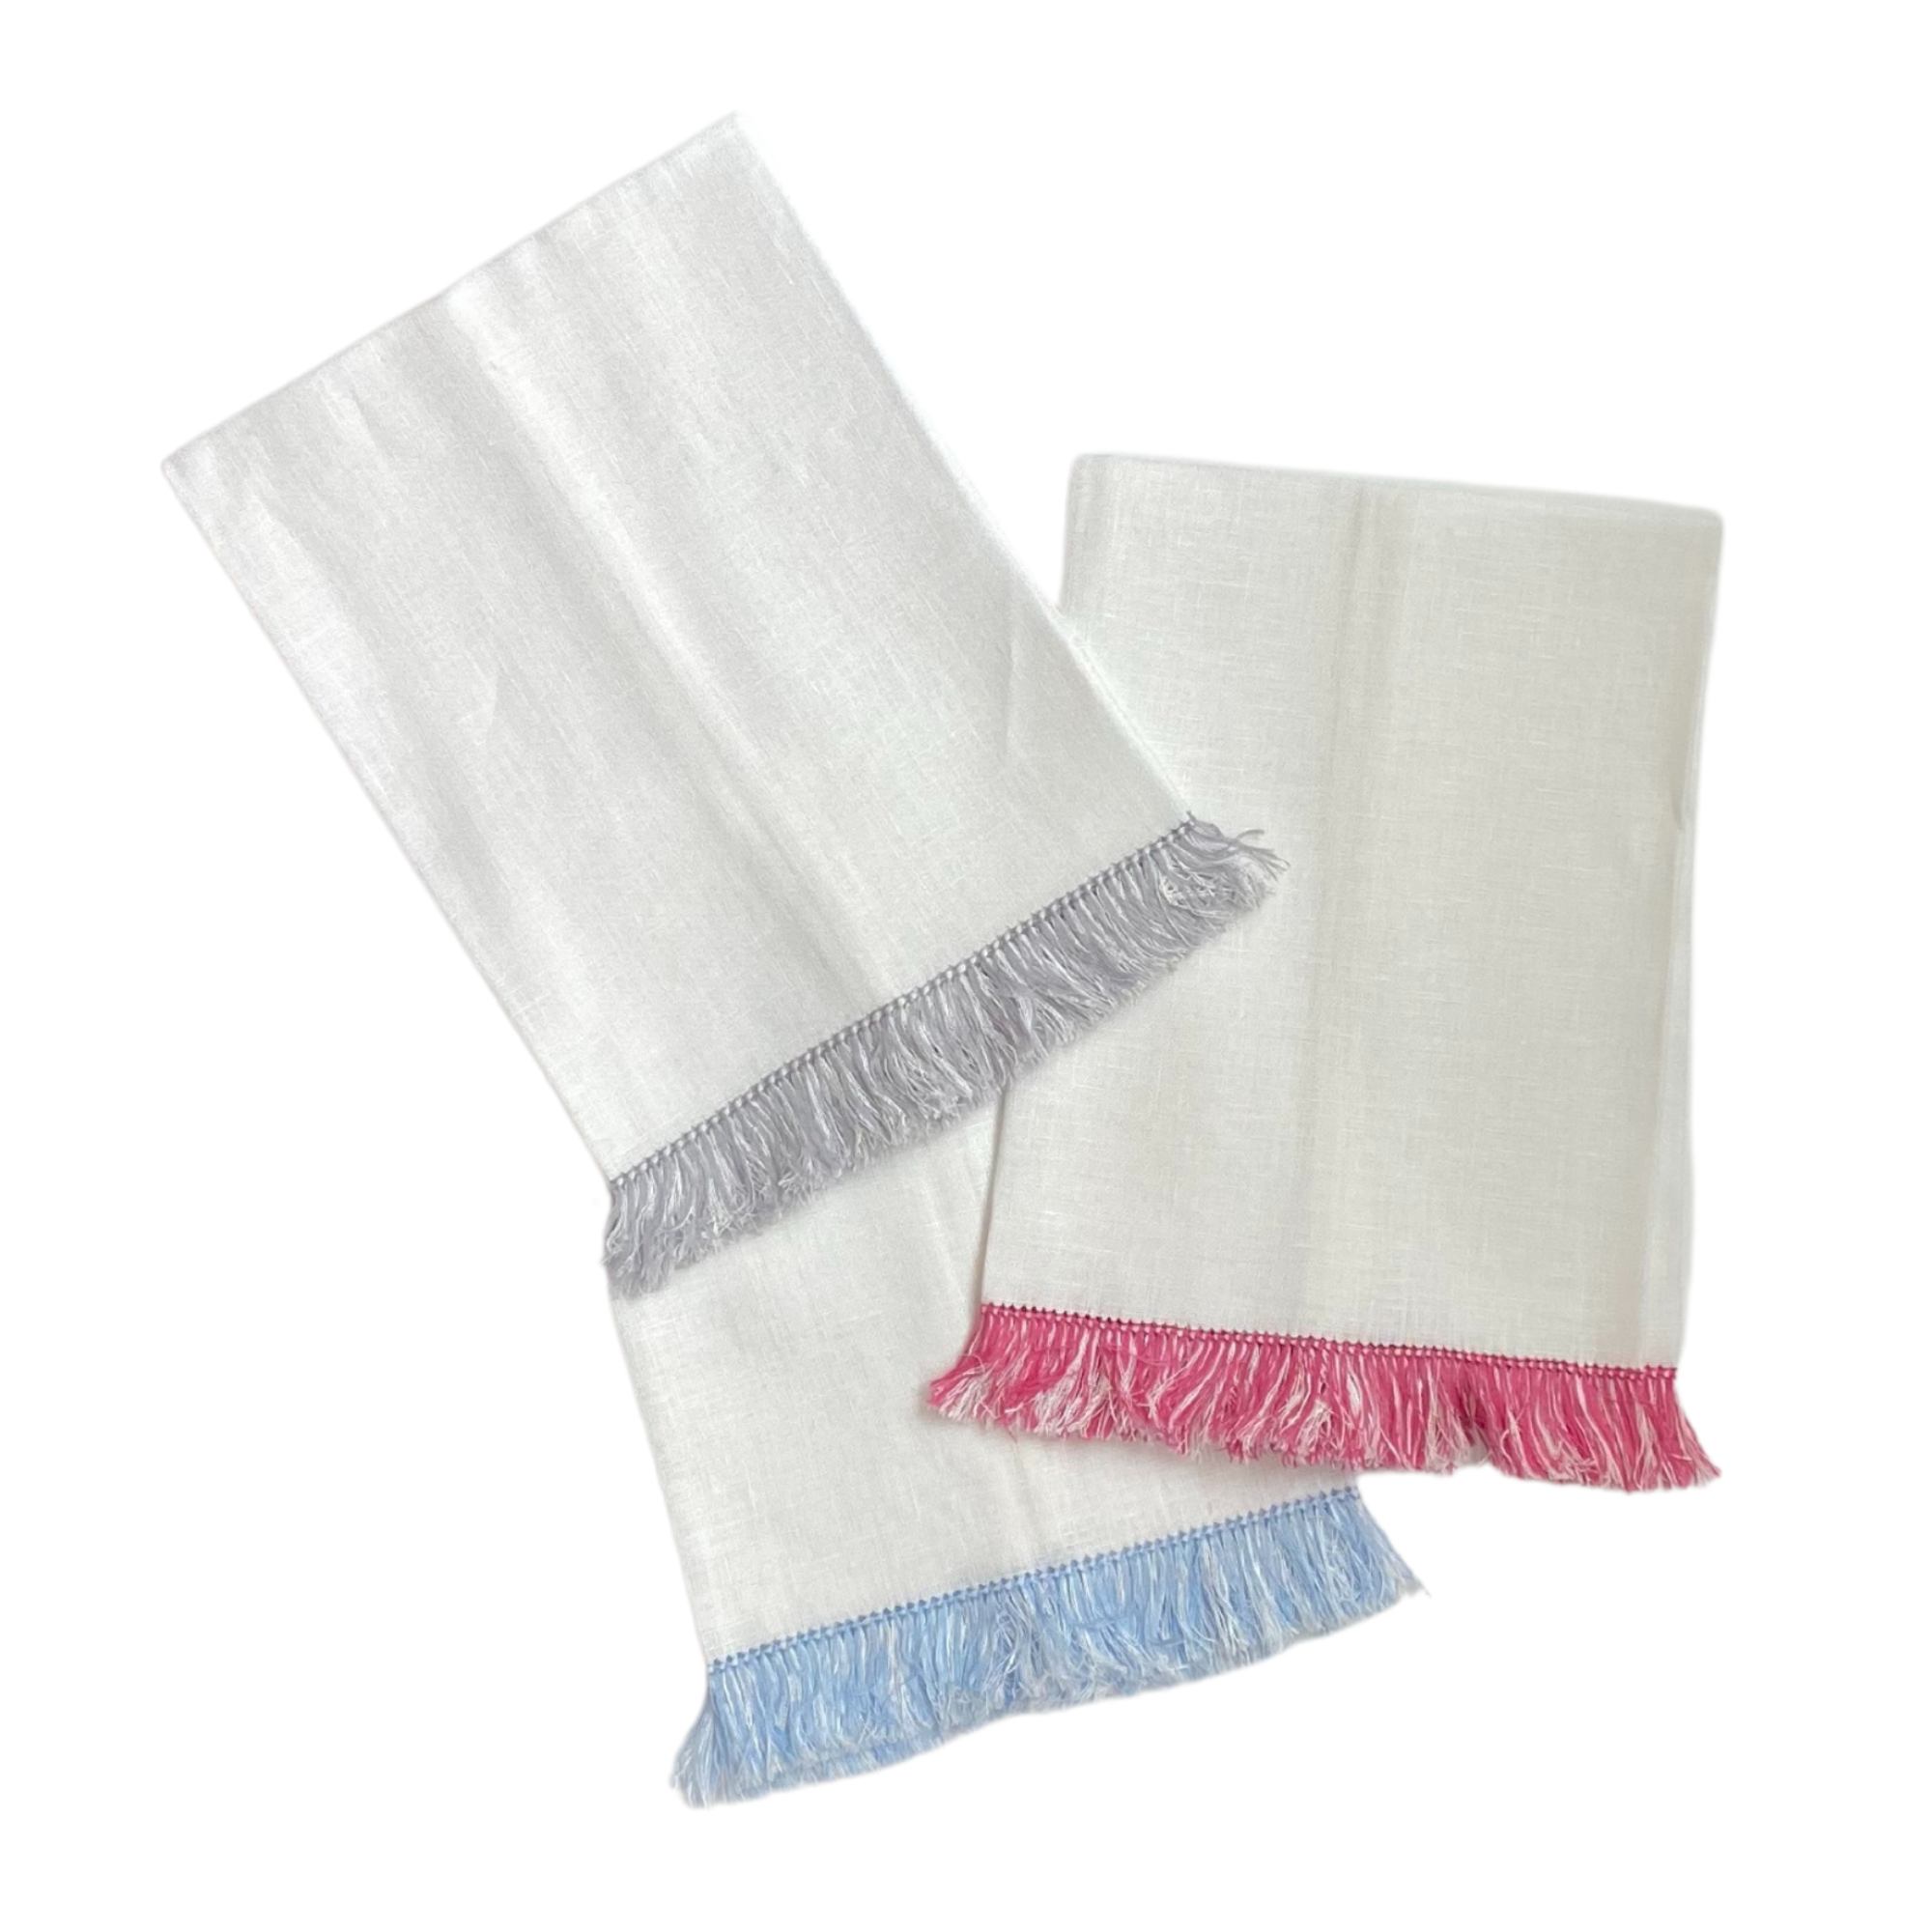 Fringe Benefits Guest Towel Merry Red | Garden Folly Fine Linens - hand towels for embroidering, fancy linen hand towels, fancy linen guest towels